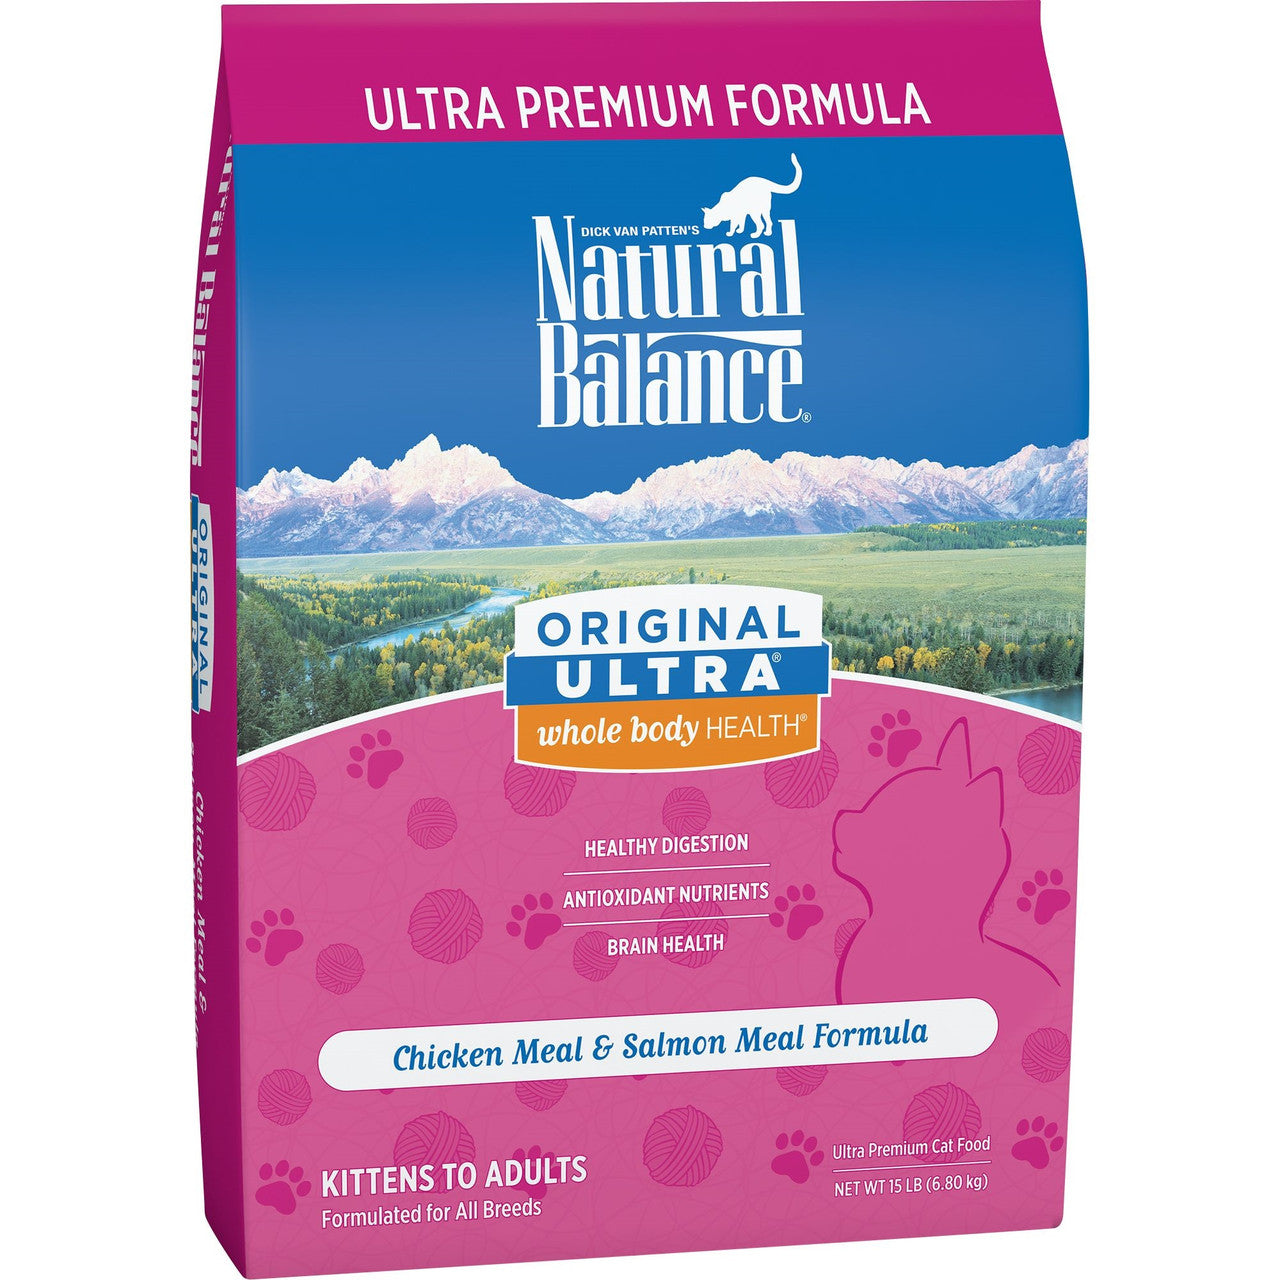 Natural Balance Pet Foods Original Ultra Premium Whole Body Health Dry Cat Food Chicken Meal & Salmon Meal 15lb